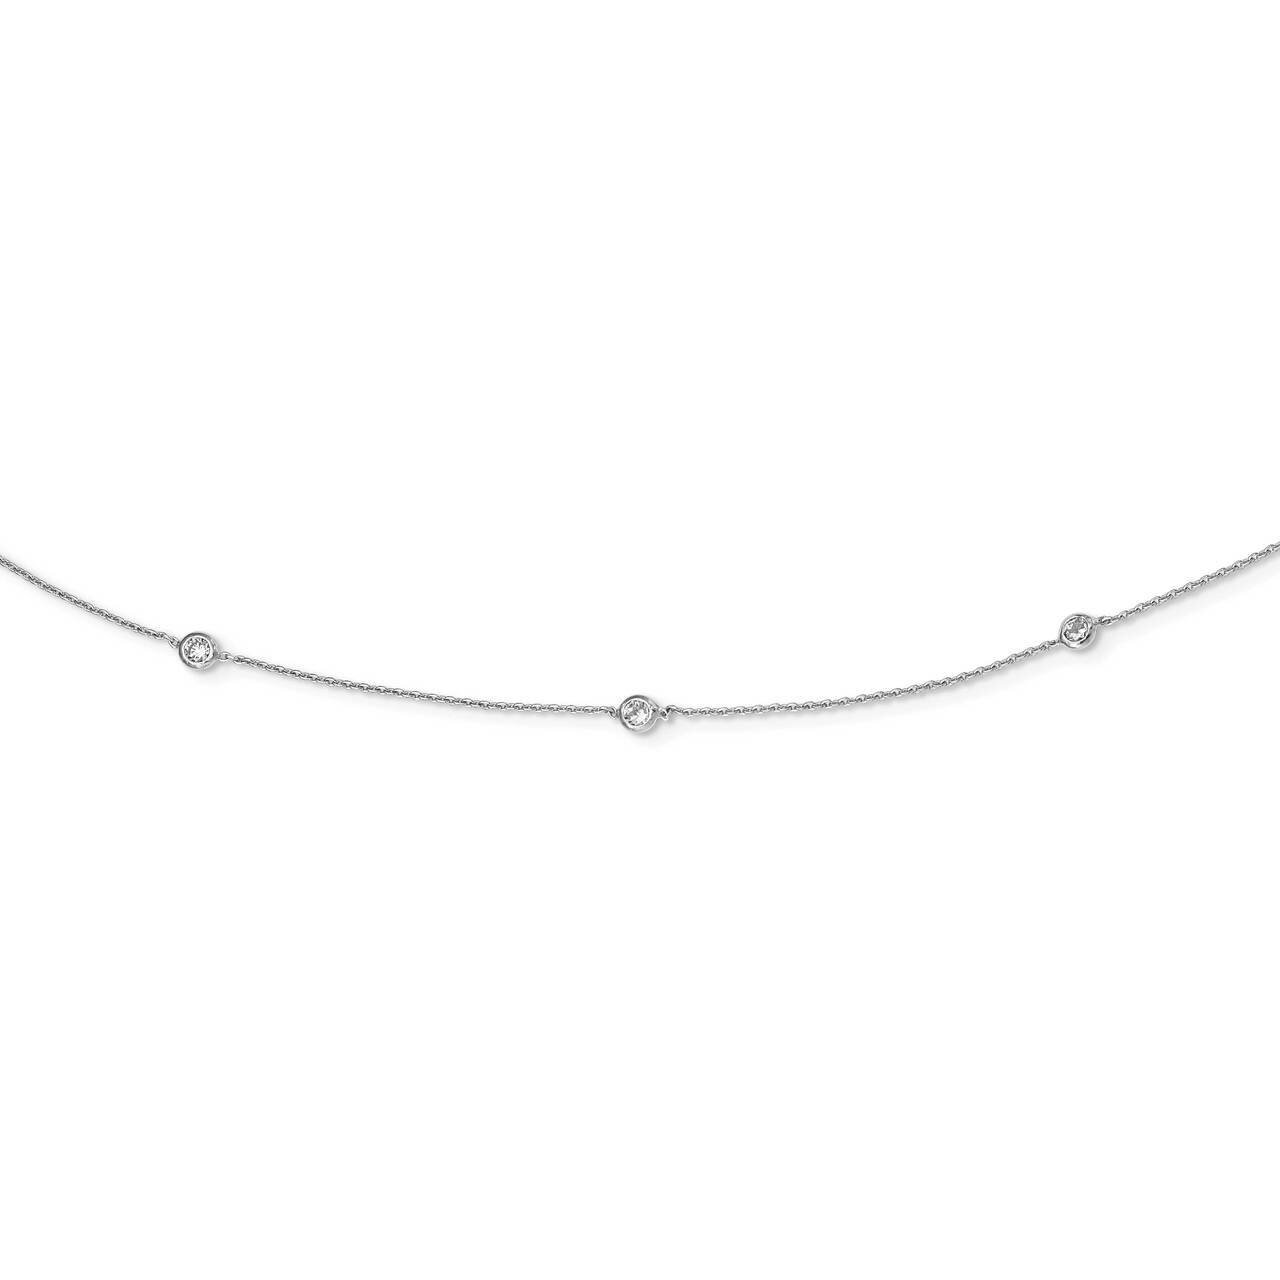 15-Station Necklace Sterling Silver Rhodium-plated CZ Diamond QG5311-32